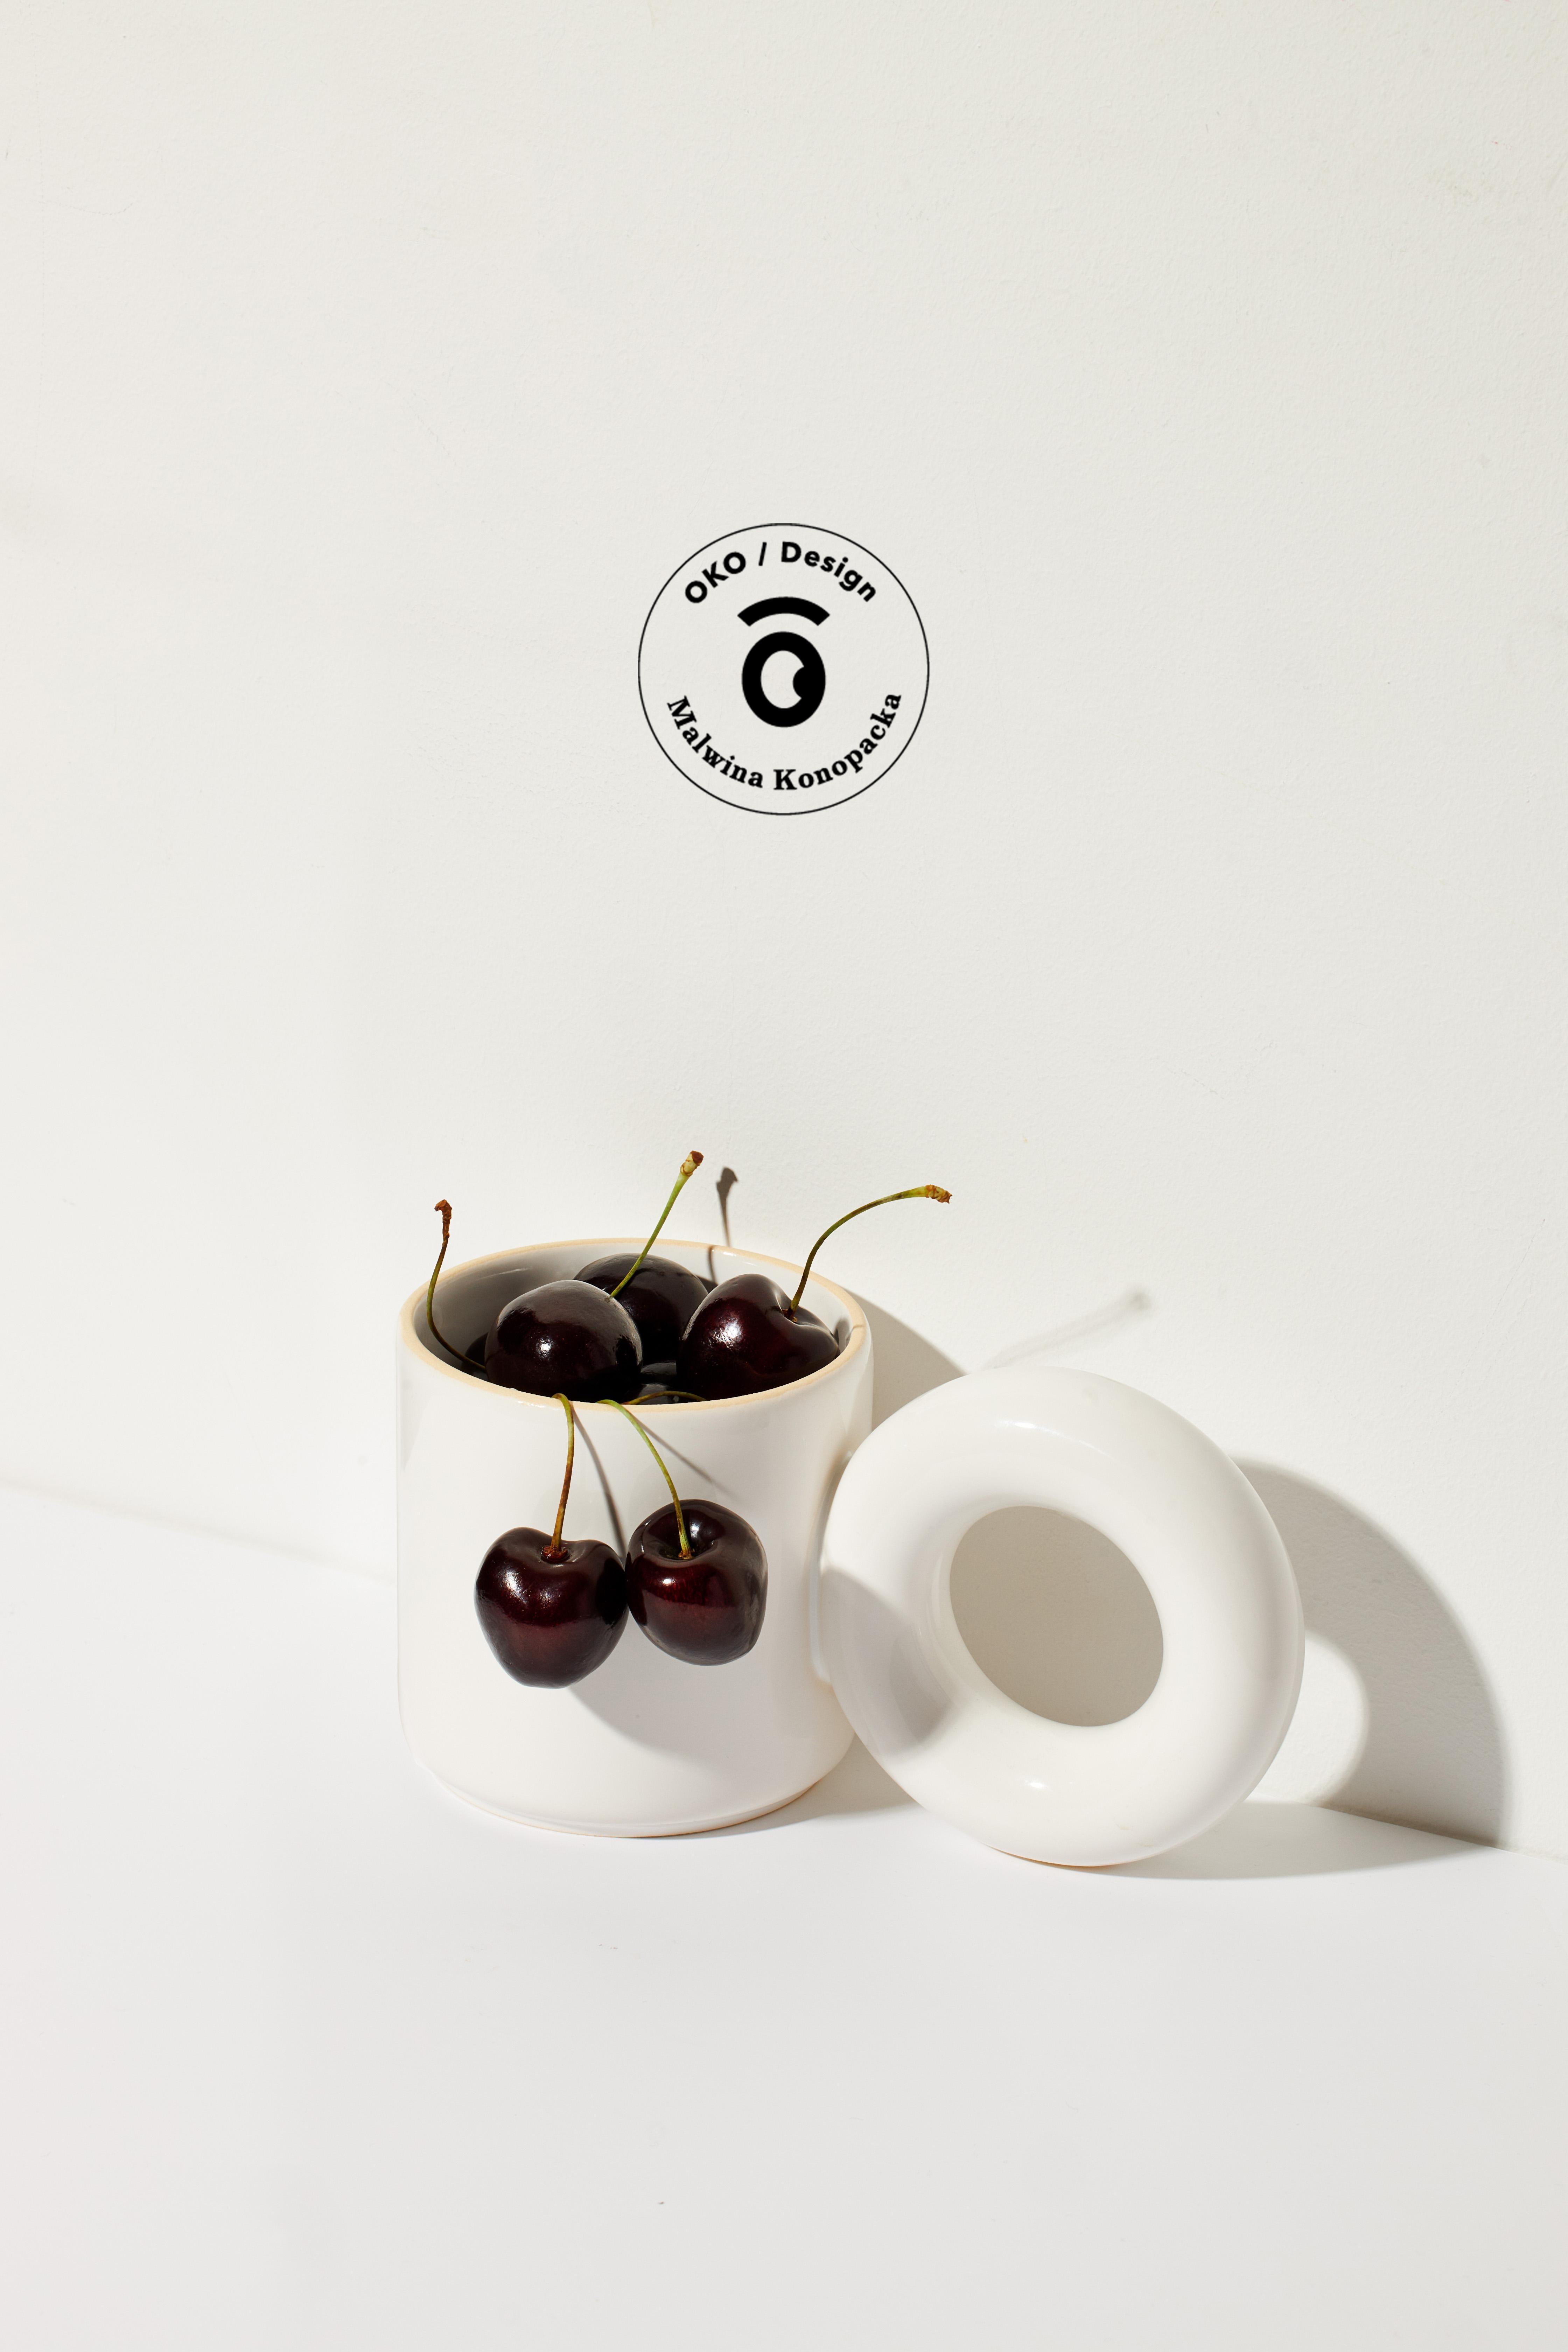 Funny, capacious, and handy – that's what UCHO is all about, the first mug in the OKO Family that begins a new chapter in the brand's history. The mug has a sturdy handle shaped like a well-known pretzel, which fits perfectly in the hand! Charming